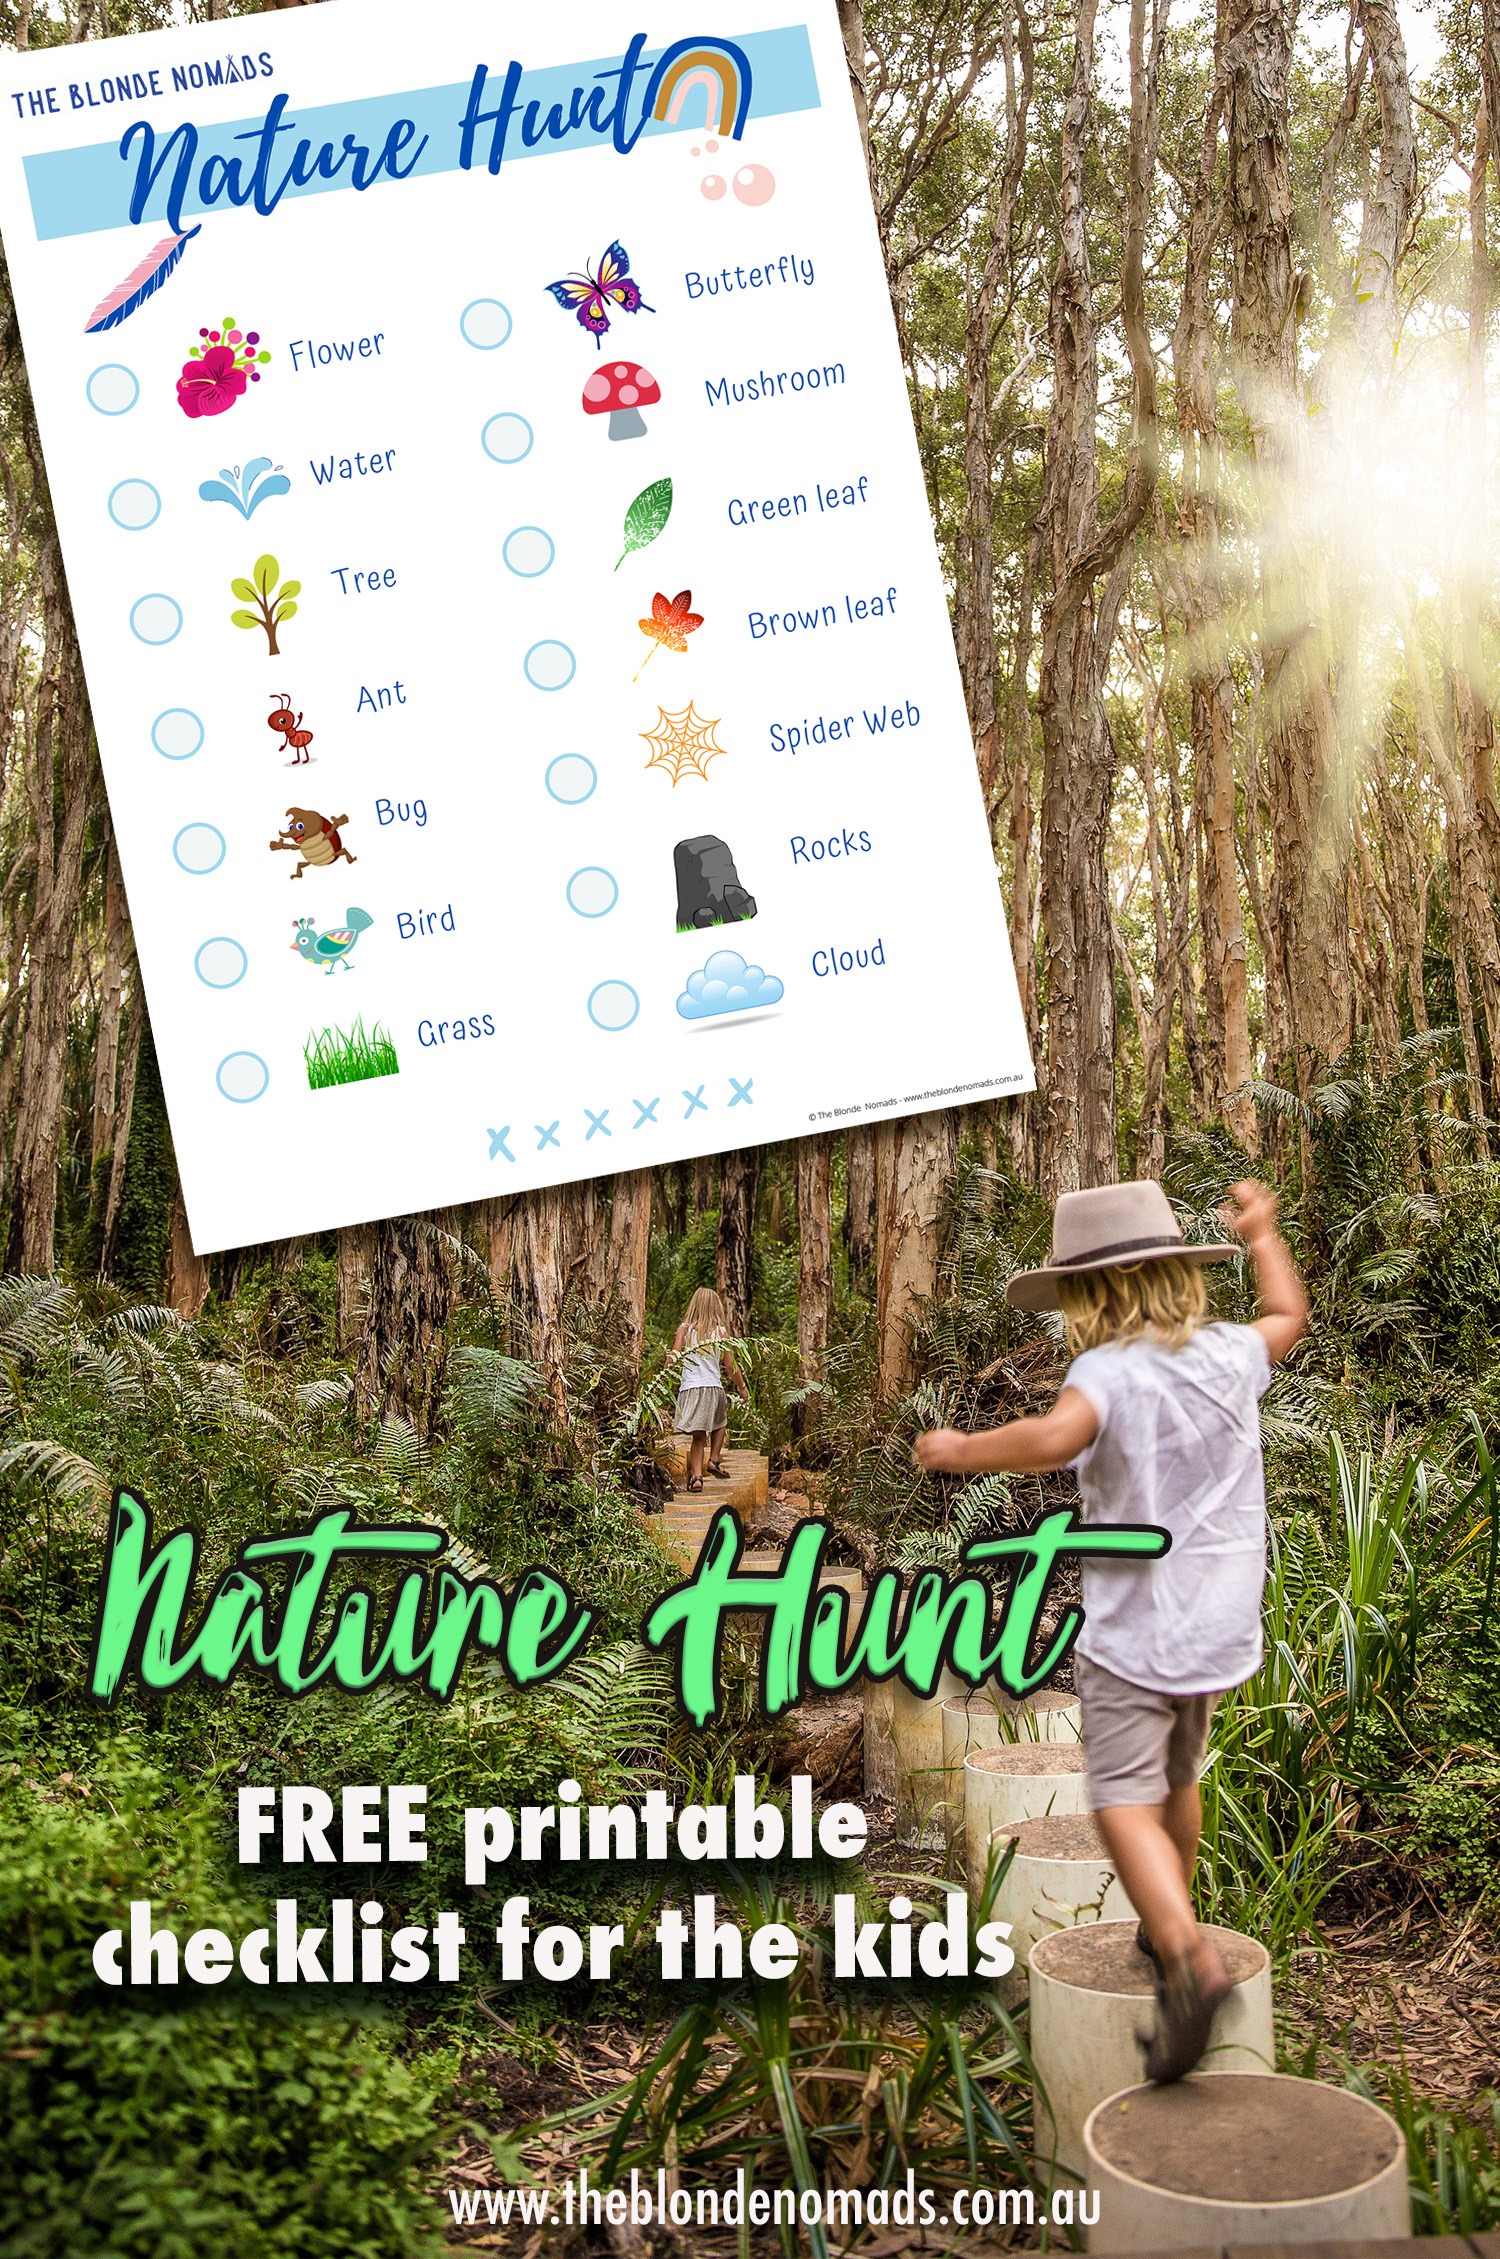 Nature hunt checklist free to download from The Blonde Nomads